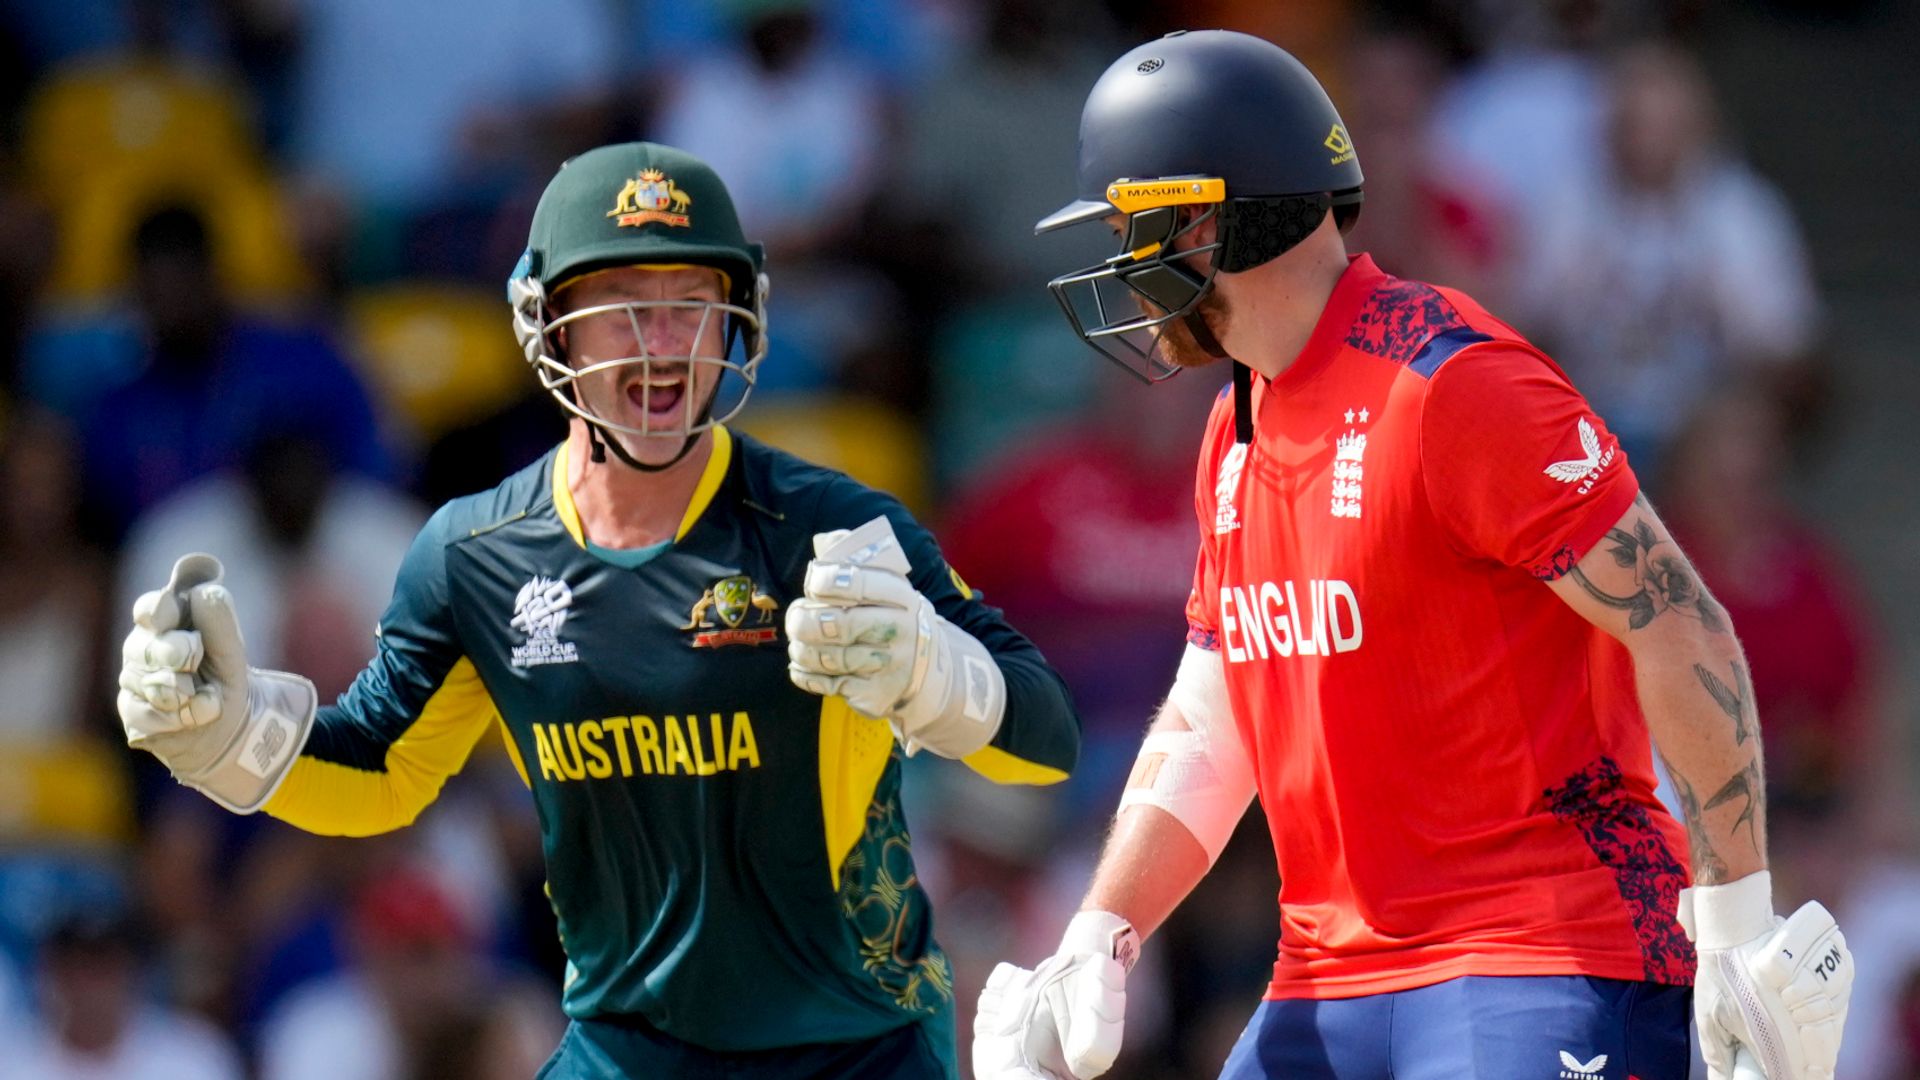 Australia beat England by 36 runs at T20 World Cup LIVE!